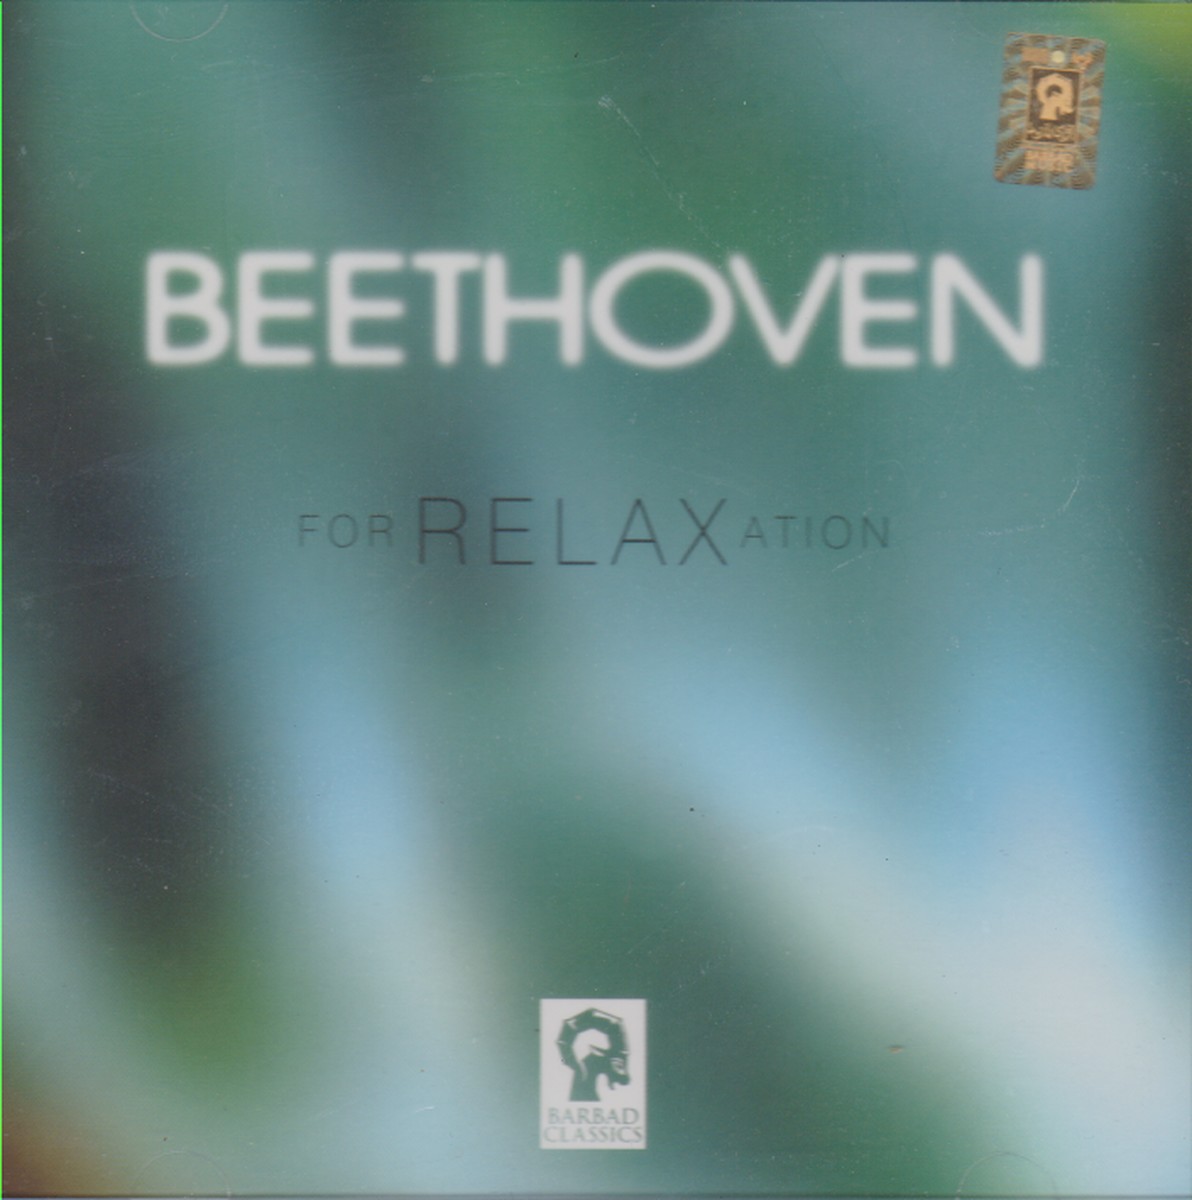 BEETHOVEN for relaxation